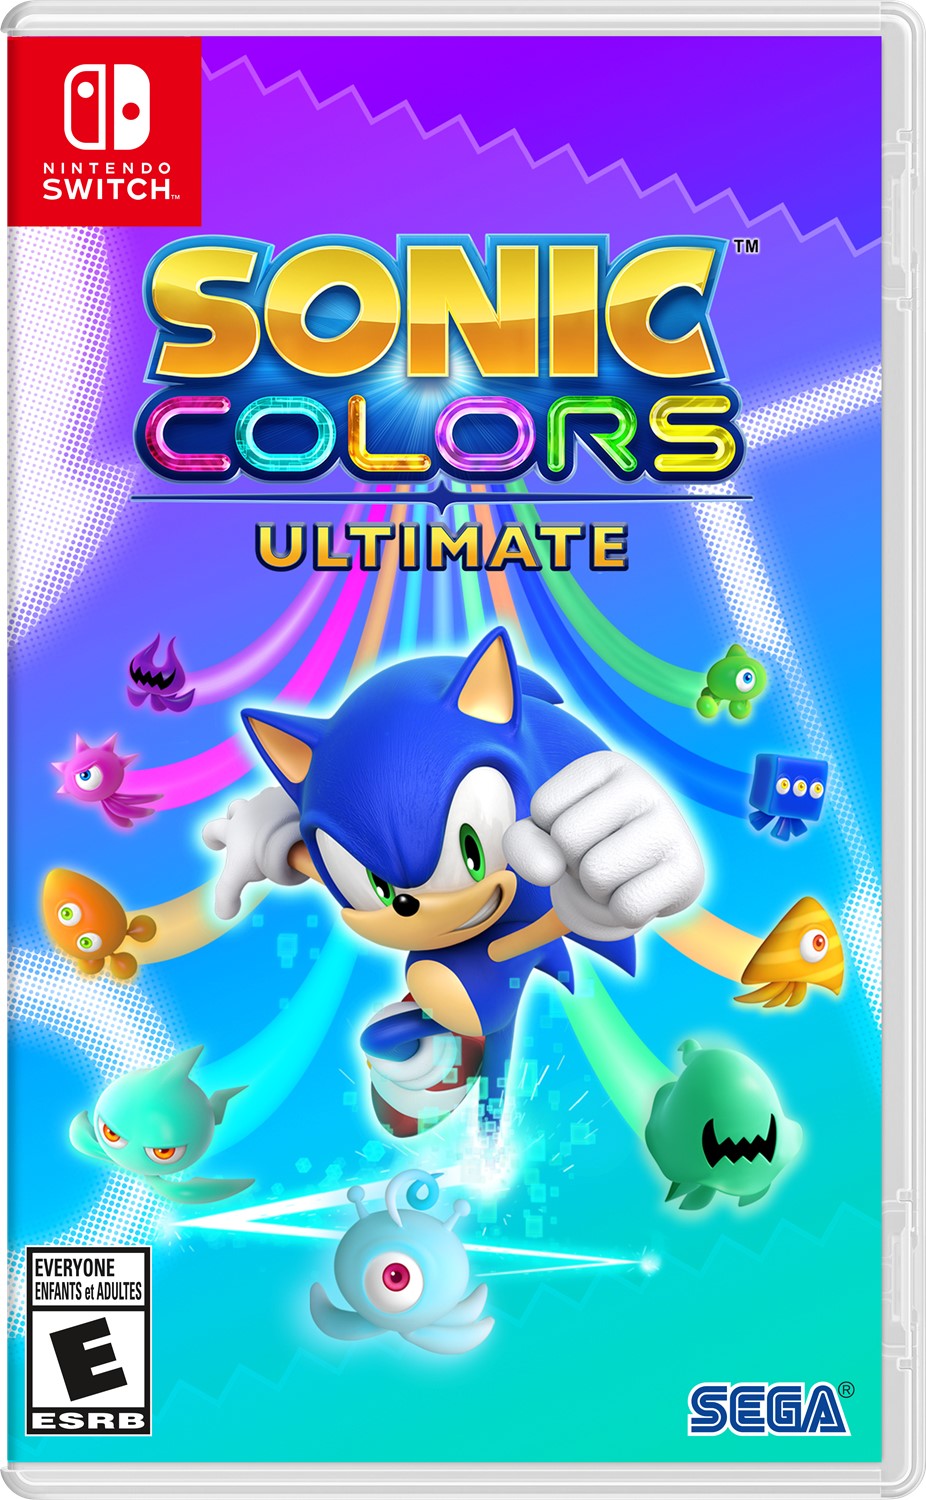 SONIC COLORS NINTENDO Wii / 2010 / RATED E FOR EVERYONE!!